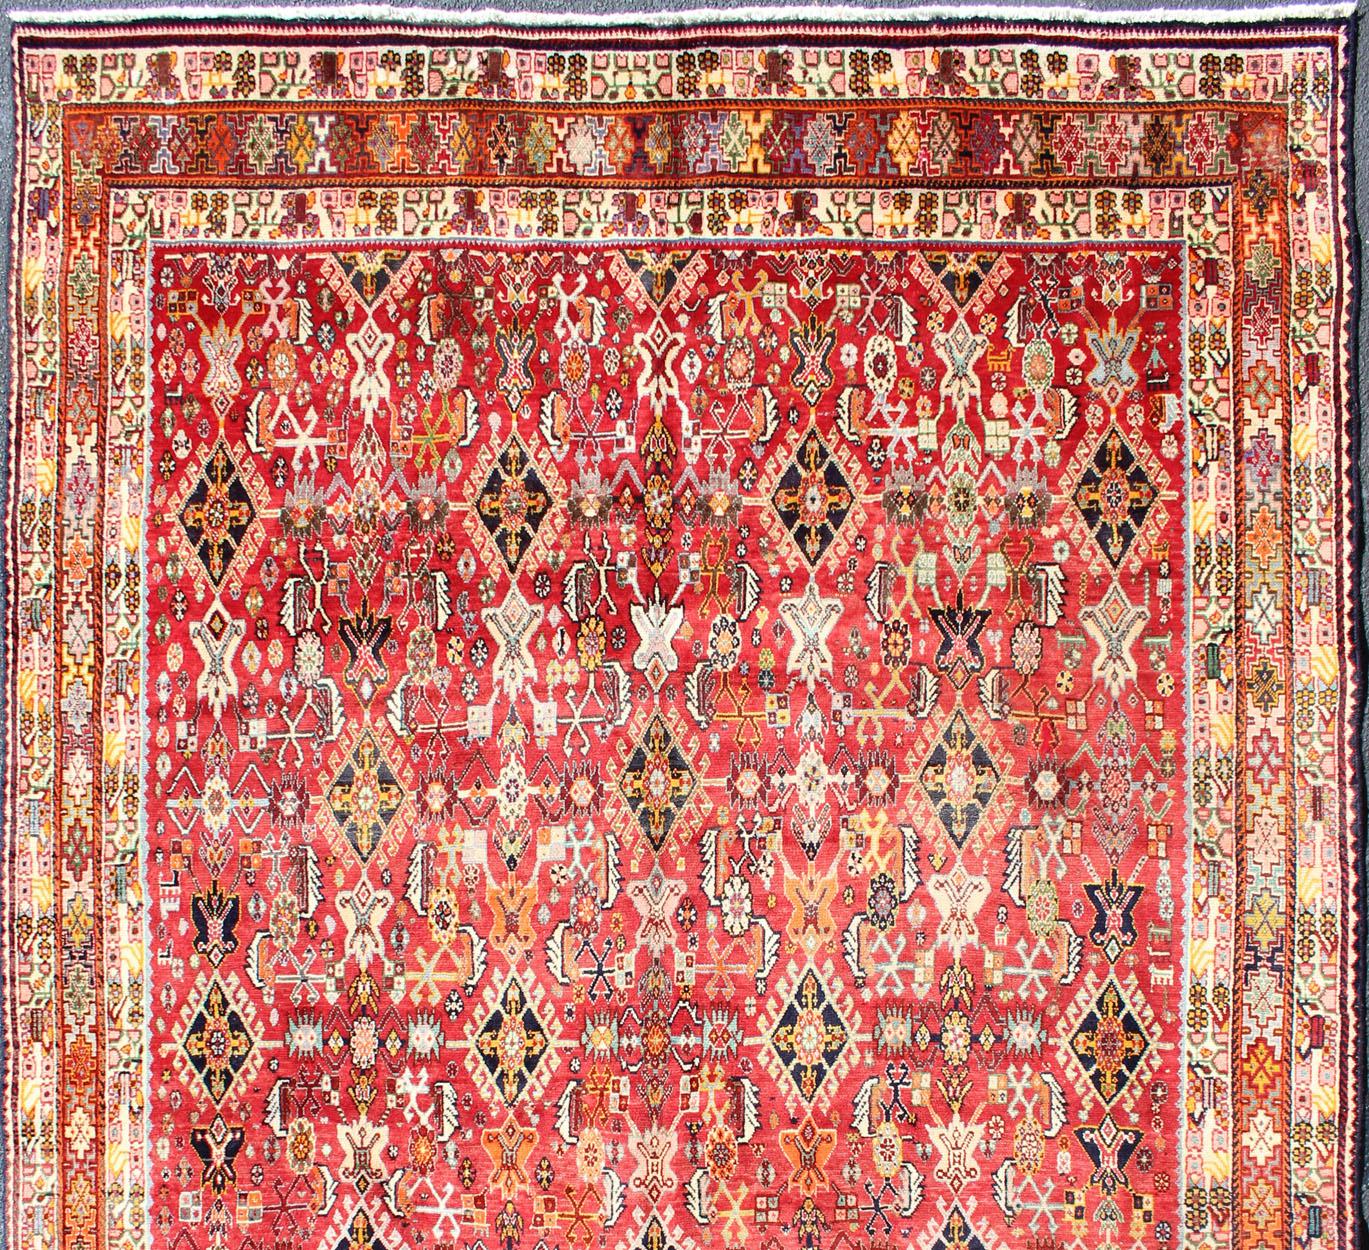 Hand-Knotted Vintage Shiraz/Qashgai Persian Rug in All-Over Design in Red and Multi-Colors